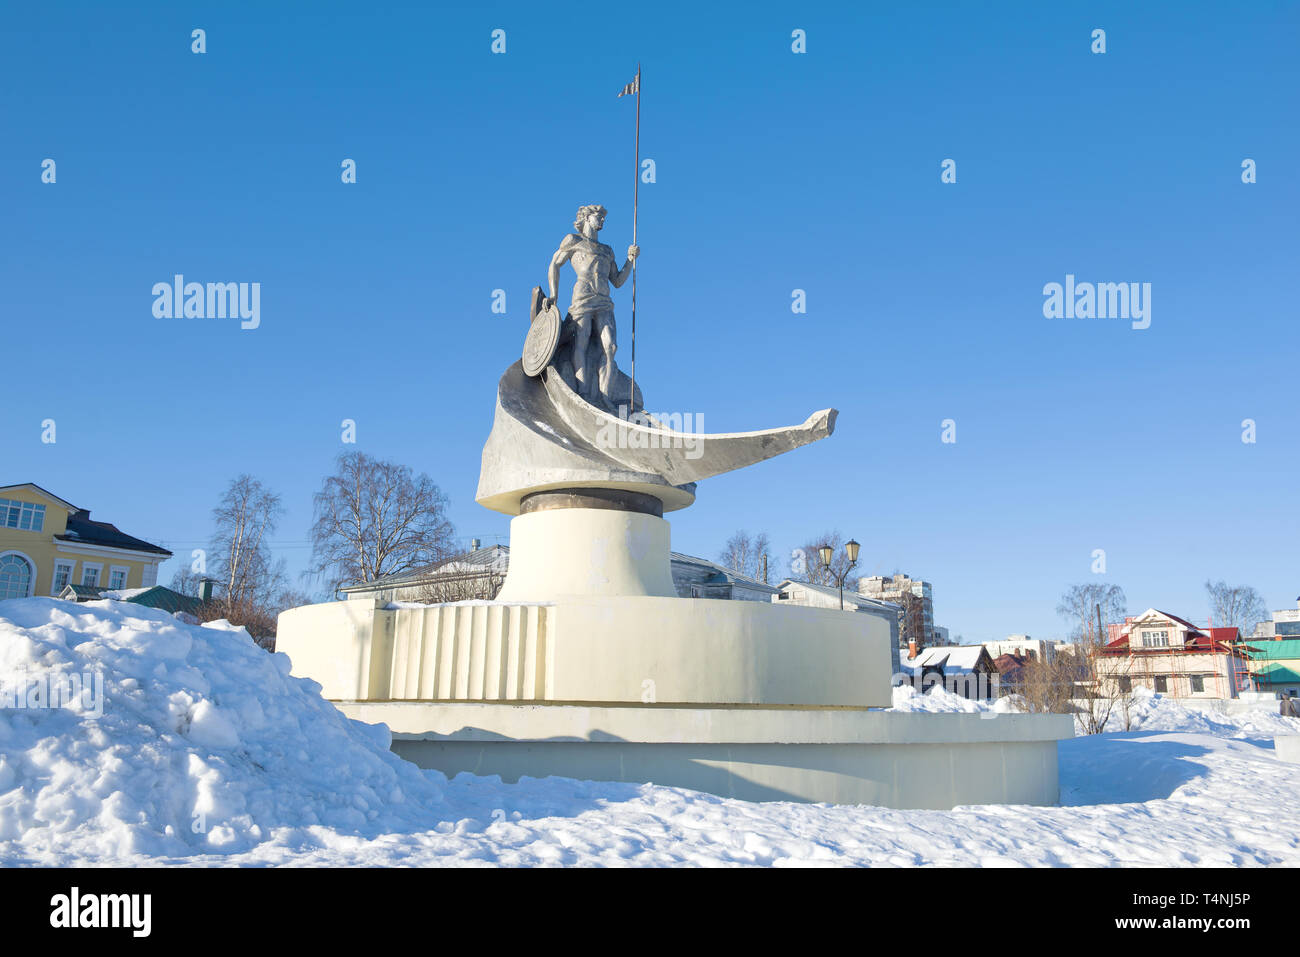 PETROZAVODSK, RUSSIA - FEBRUARY 18, 2019: The sculpture 'Onego' (Birth of Petrozavodsk), established in honor of the 300th anniversary of the city, in Stock Photo